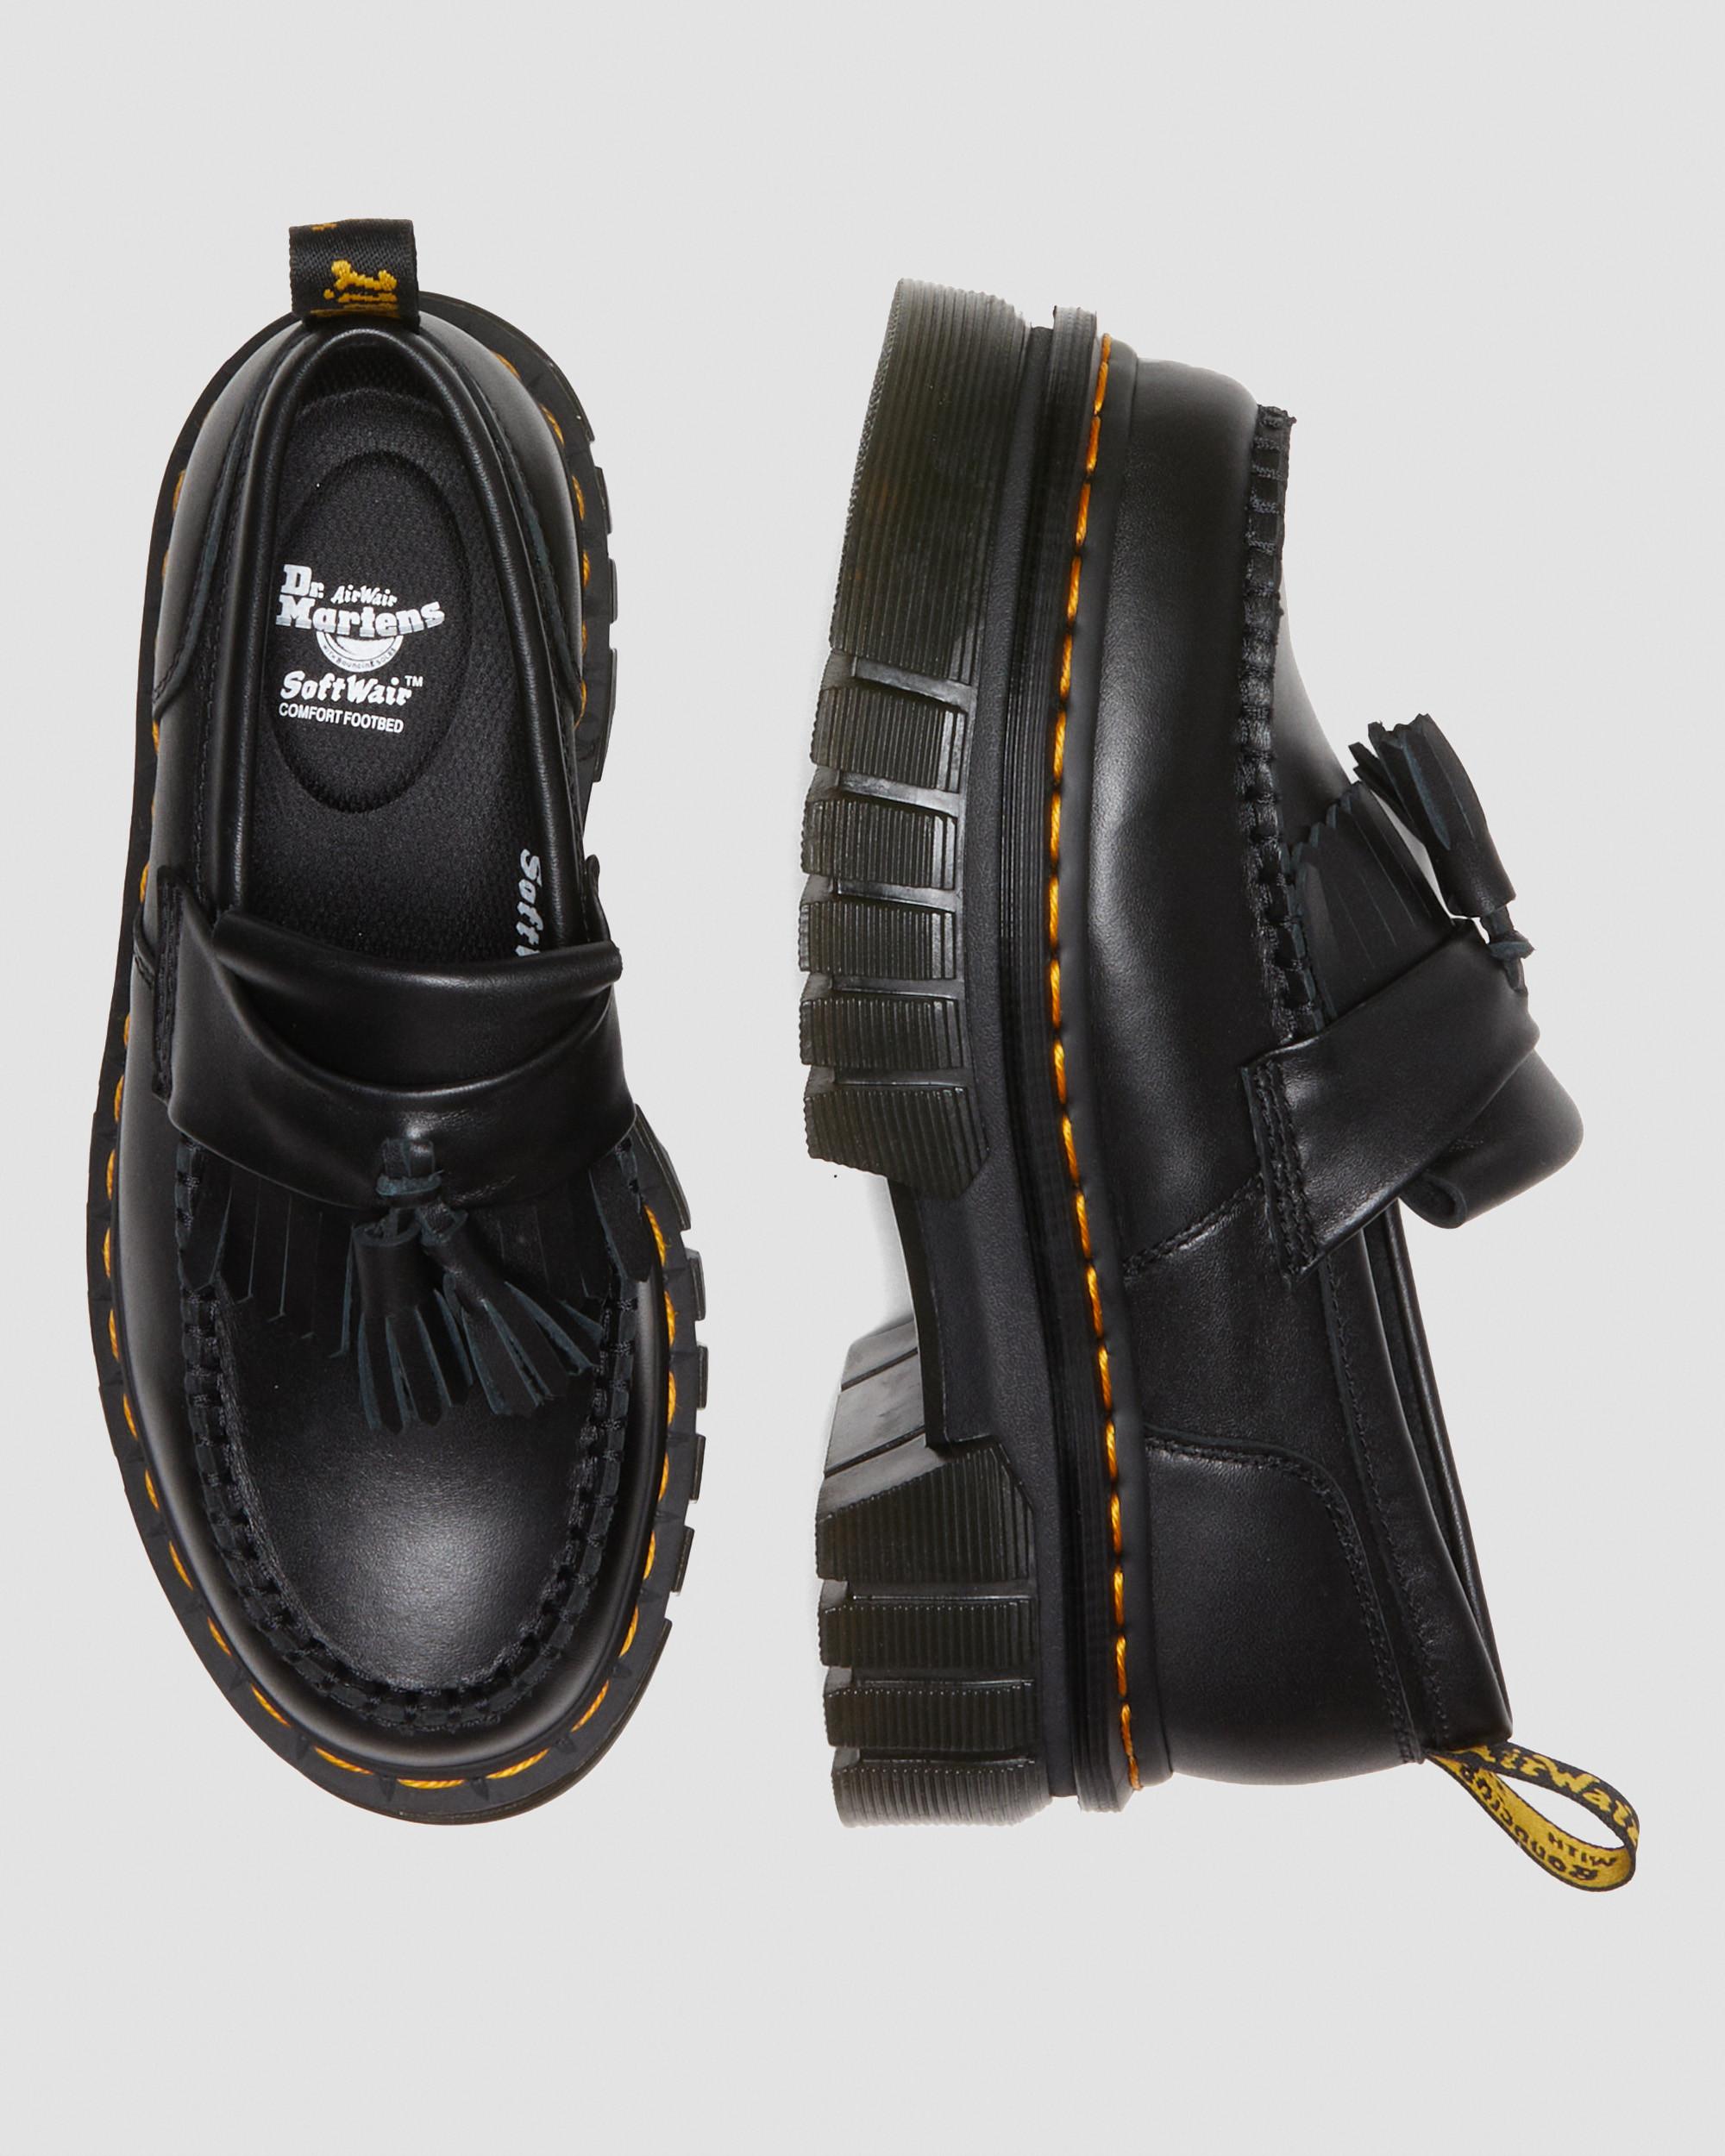 Audrick Nappa Lux Plateau LoaferAudrick Nappa Lux Plateau Loafer Dr. Martens